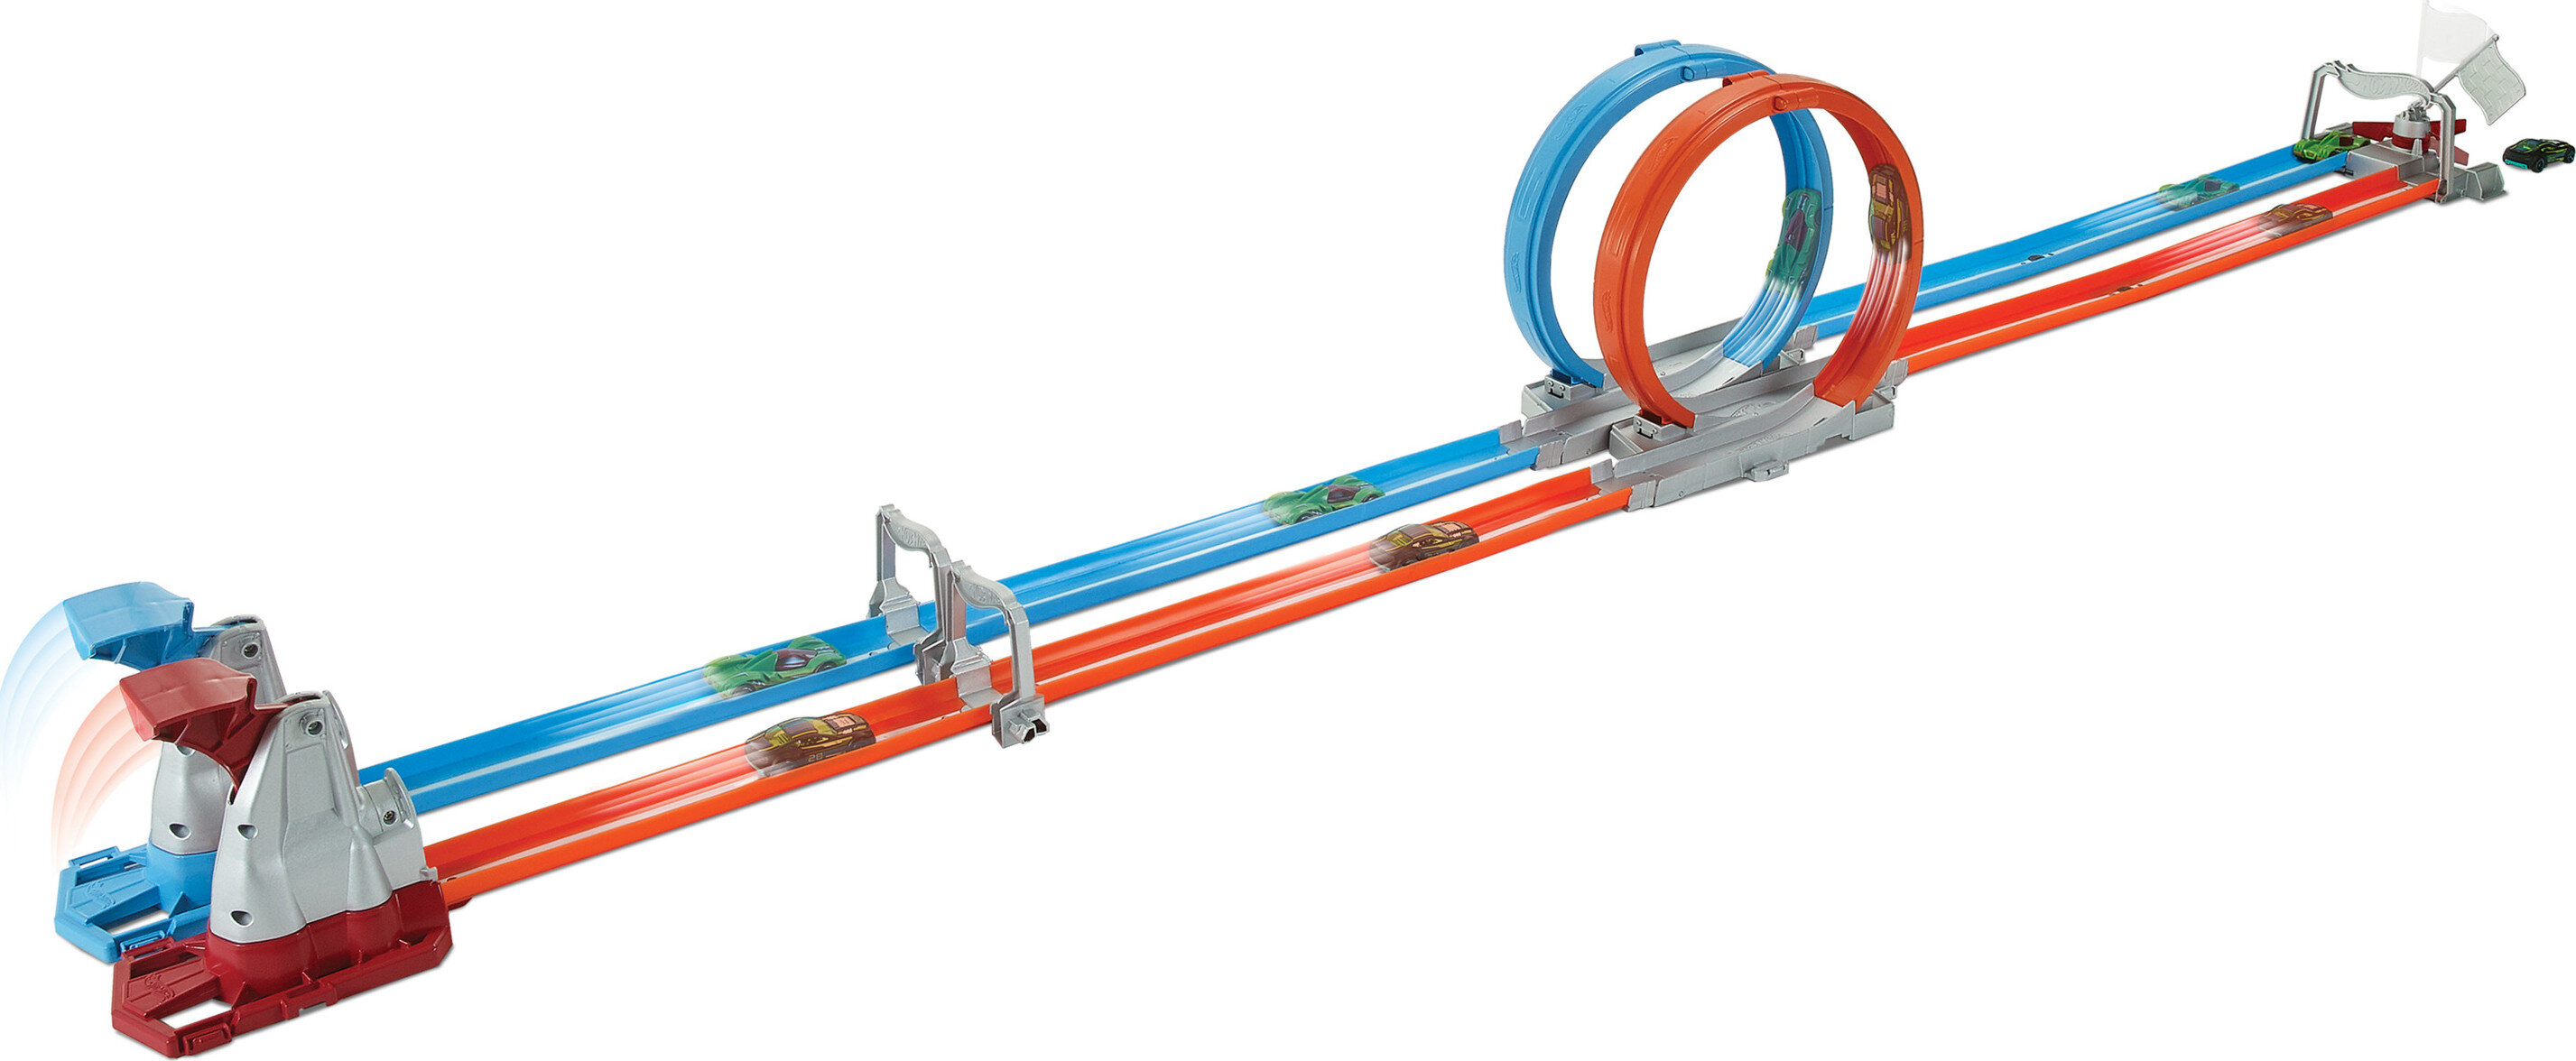 Hot Wheels Double Loop Dash Track Set with 2 Toy Cars in 1:64 Scale, 12-ft Long, Ages 5 and up - image 1 of 7